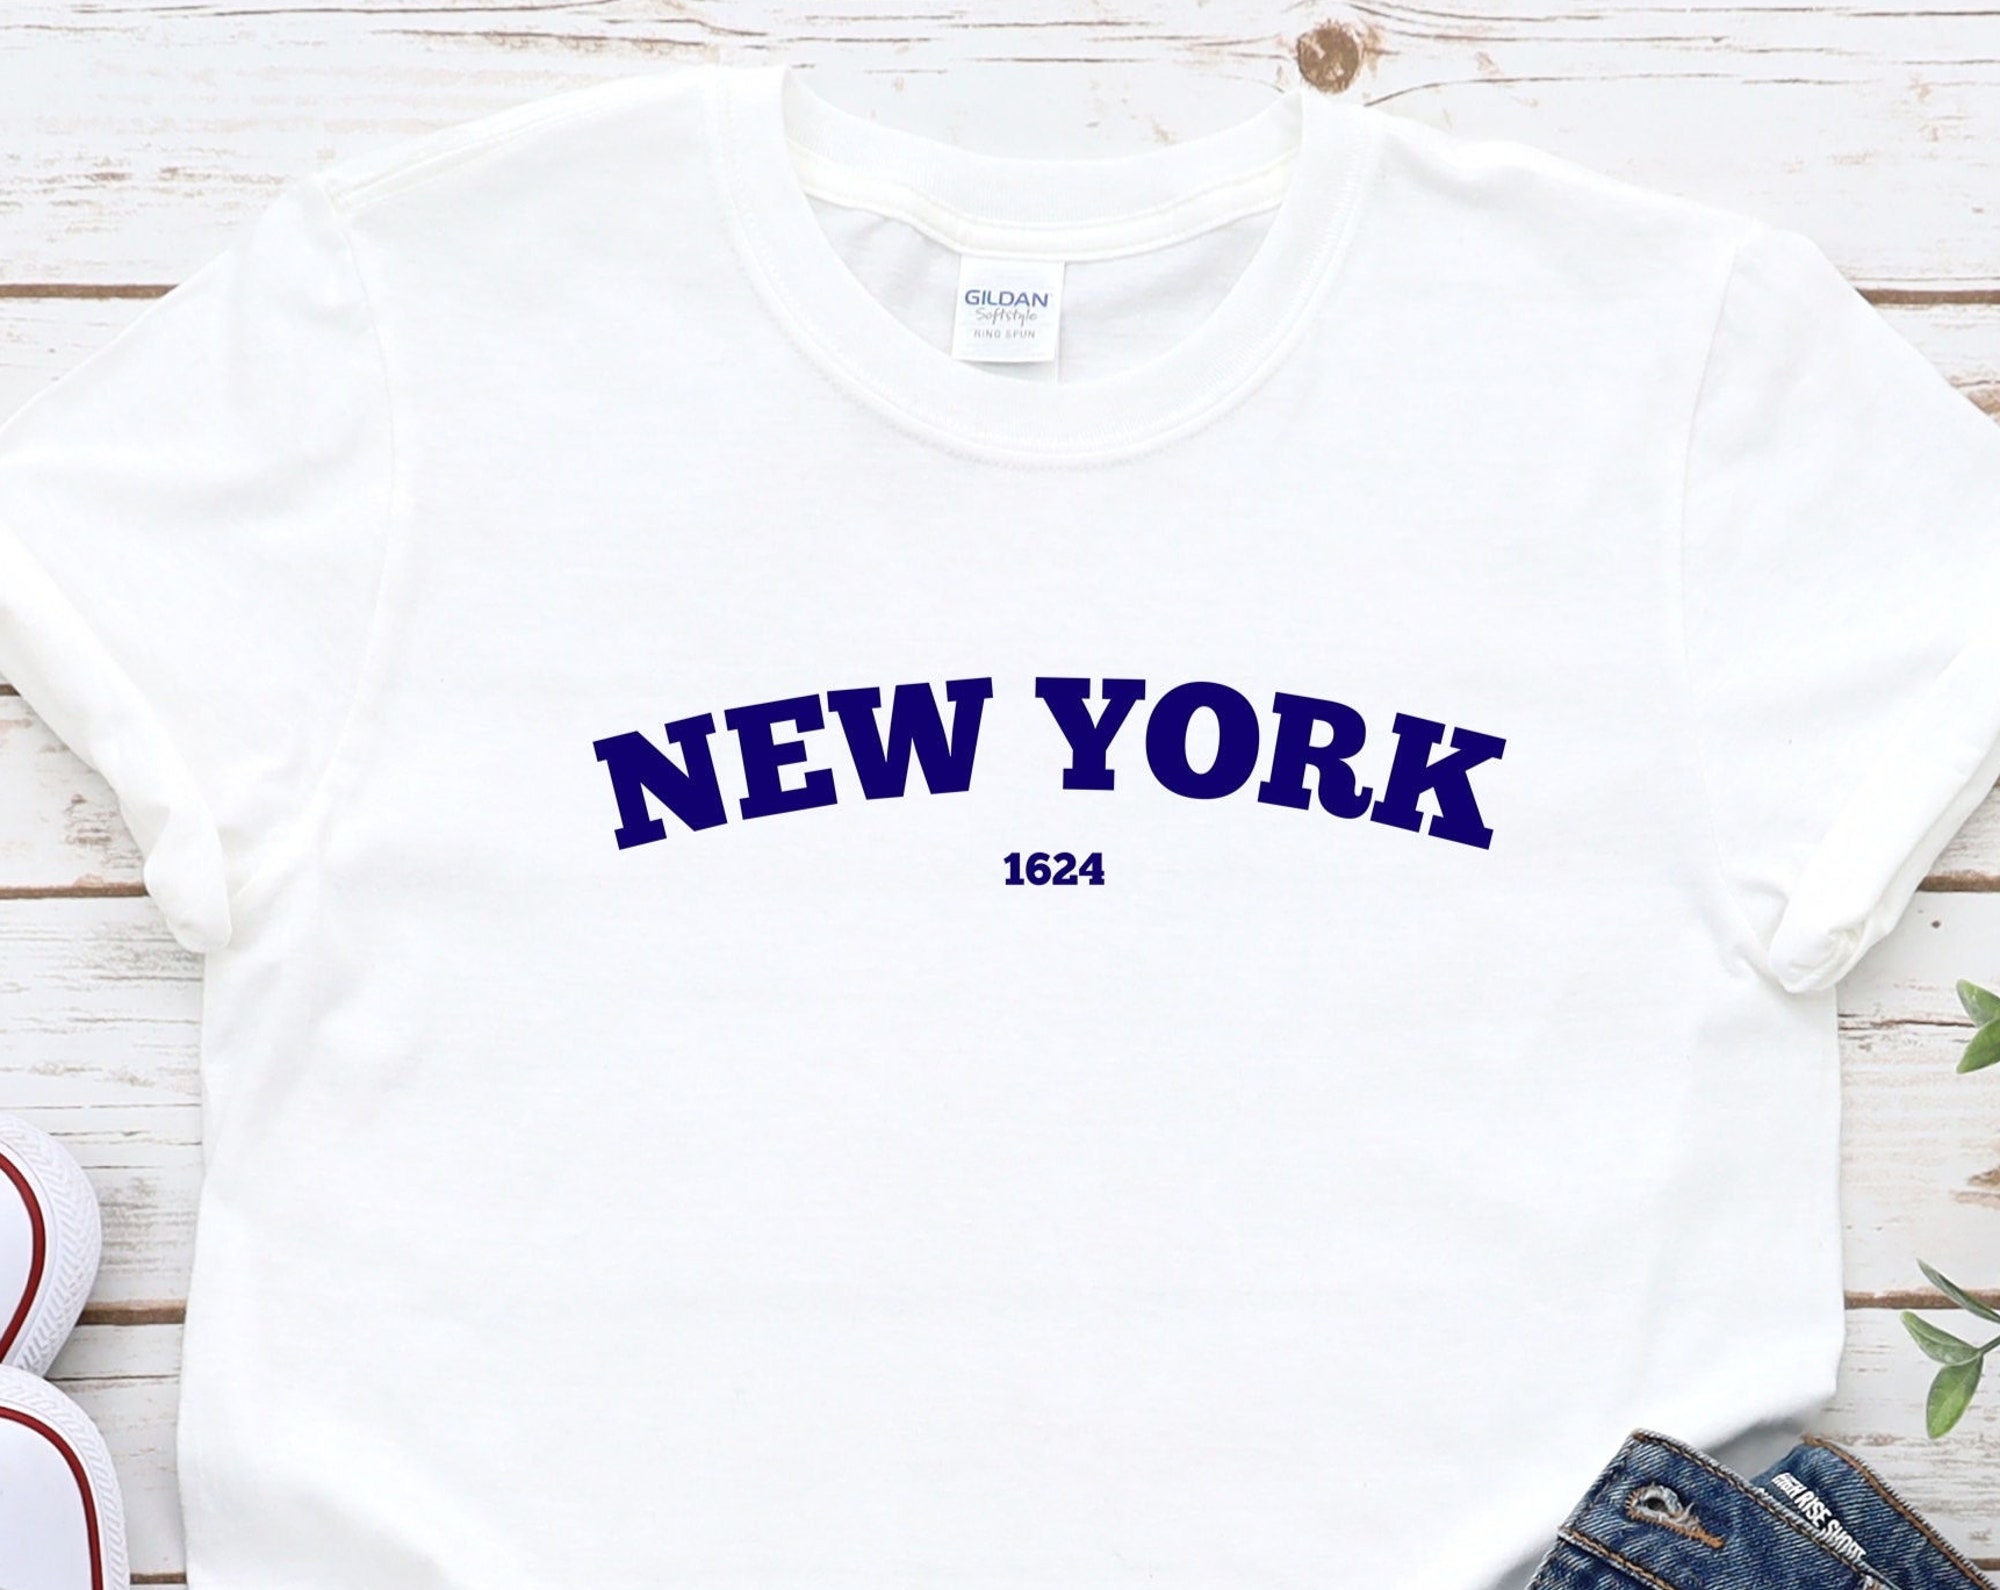 Discover New York, The Big Apple!  Show your New York love  T-shirt